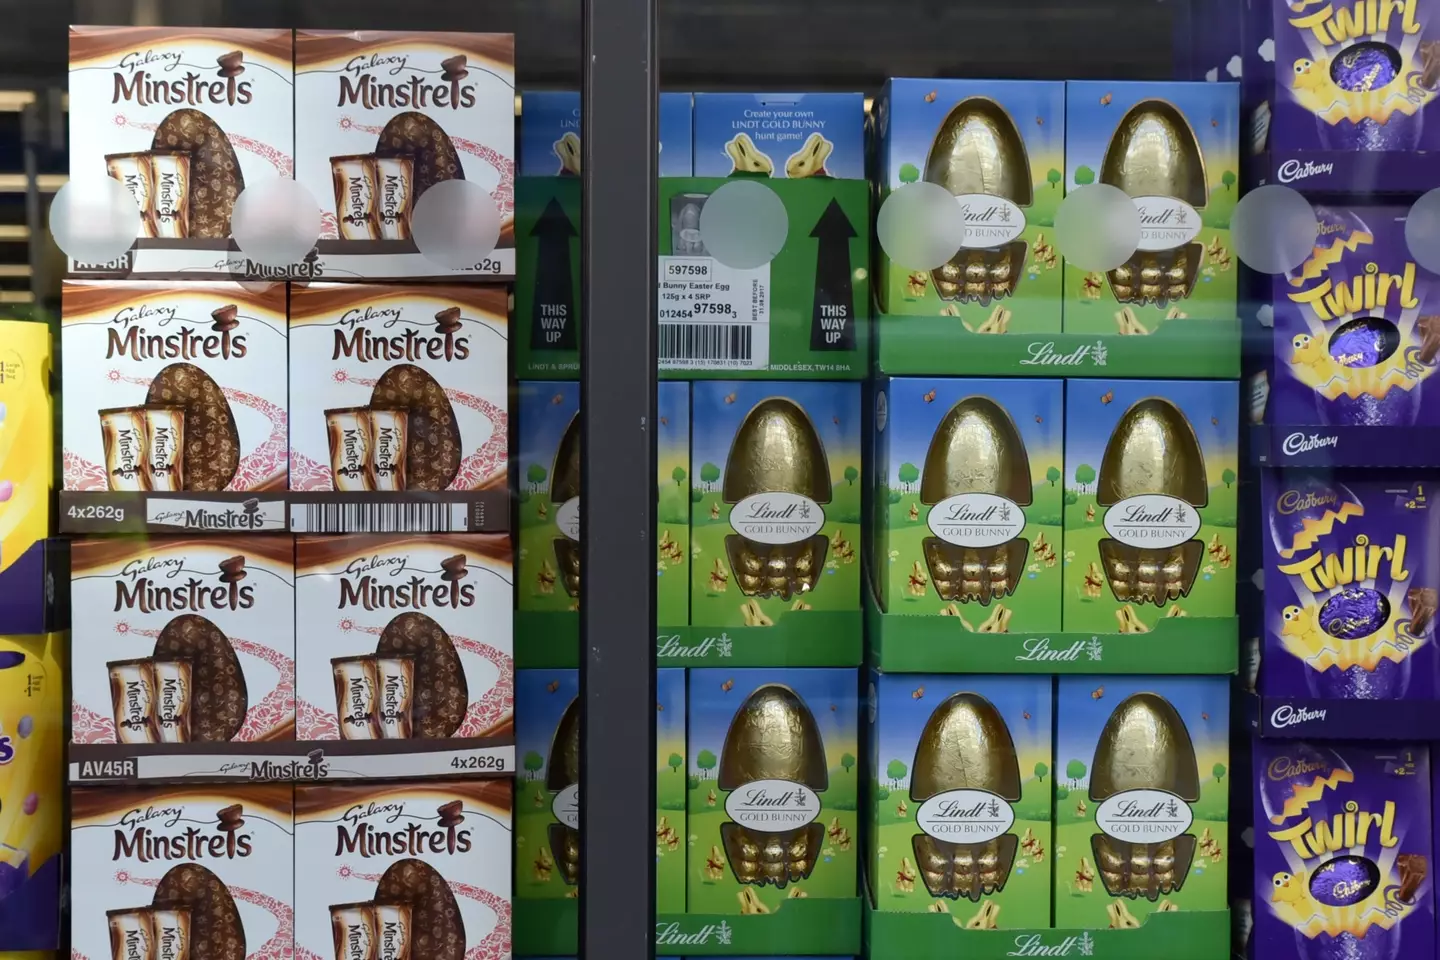 Dr Andrew Kelso said people shouldn't eat an entire Easter egg in one go.